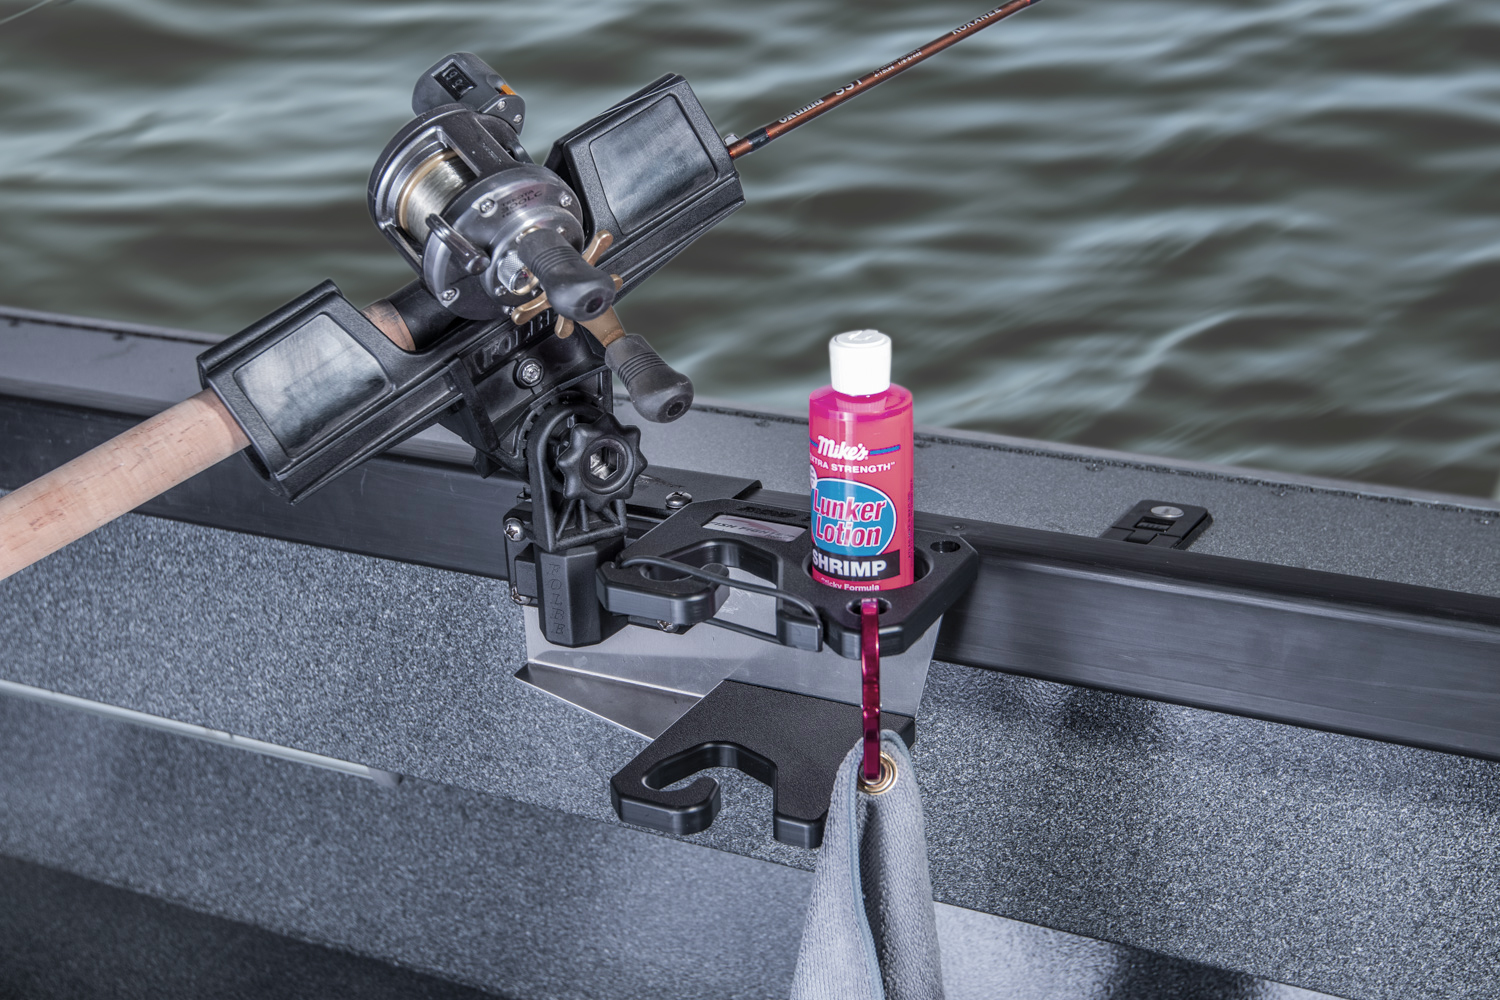 Folbe® Advantage Junior Rod Holder - Fish Fighter® Products